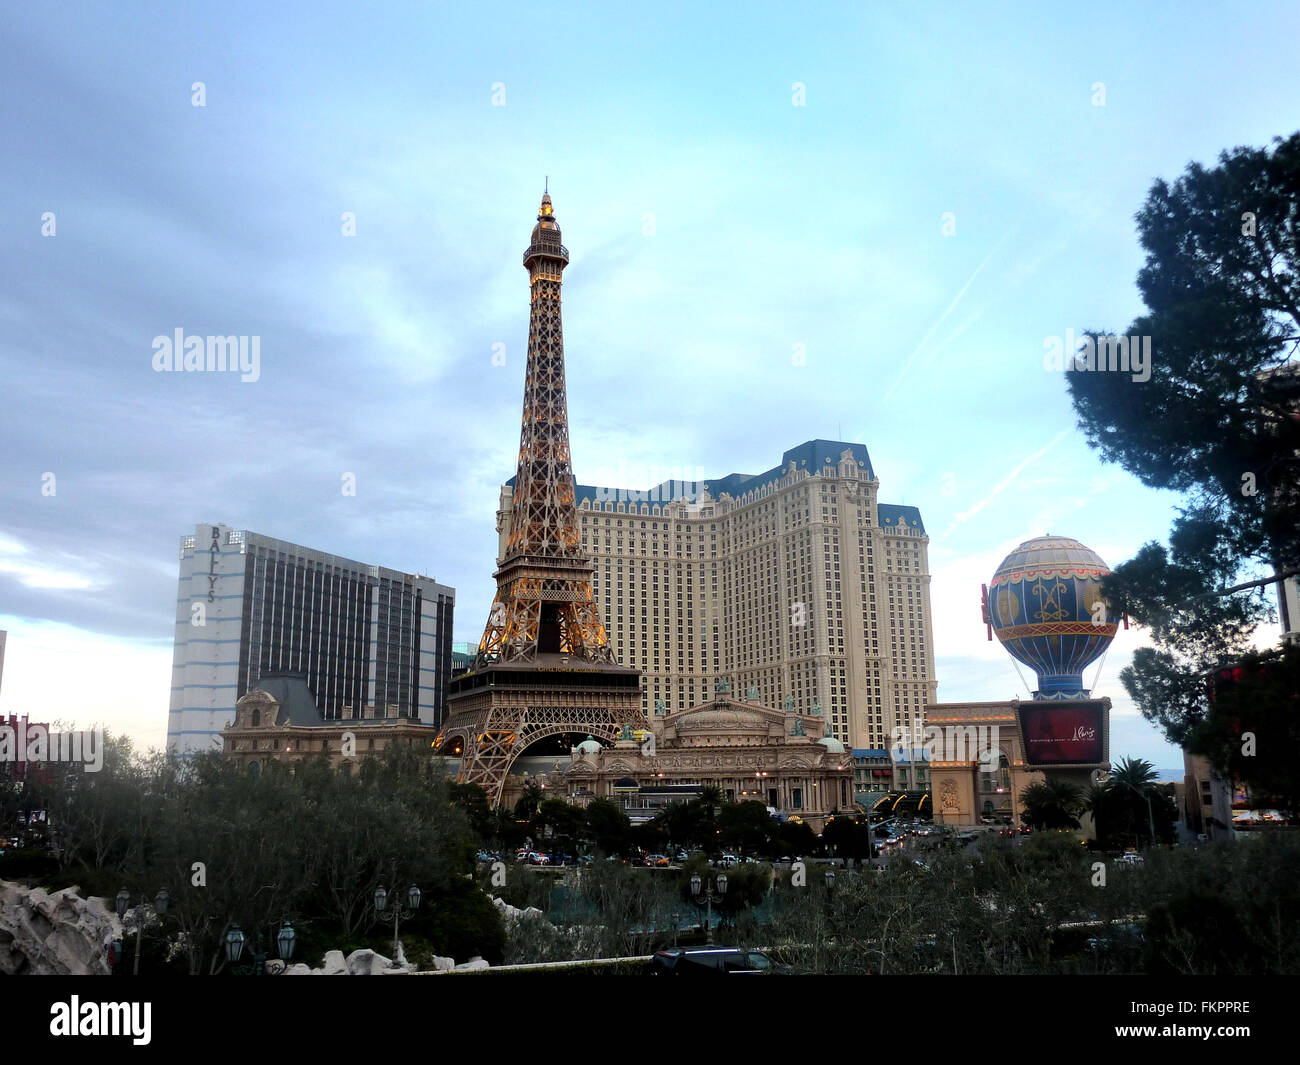 Paris Las Vegas Hotel and Casino, replica of Eiffel tower Ballys and Balloon seen from a distance during day time, Las Vegas Stock Photo